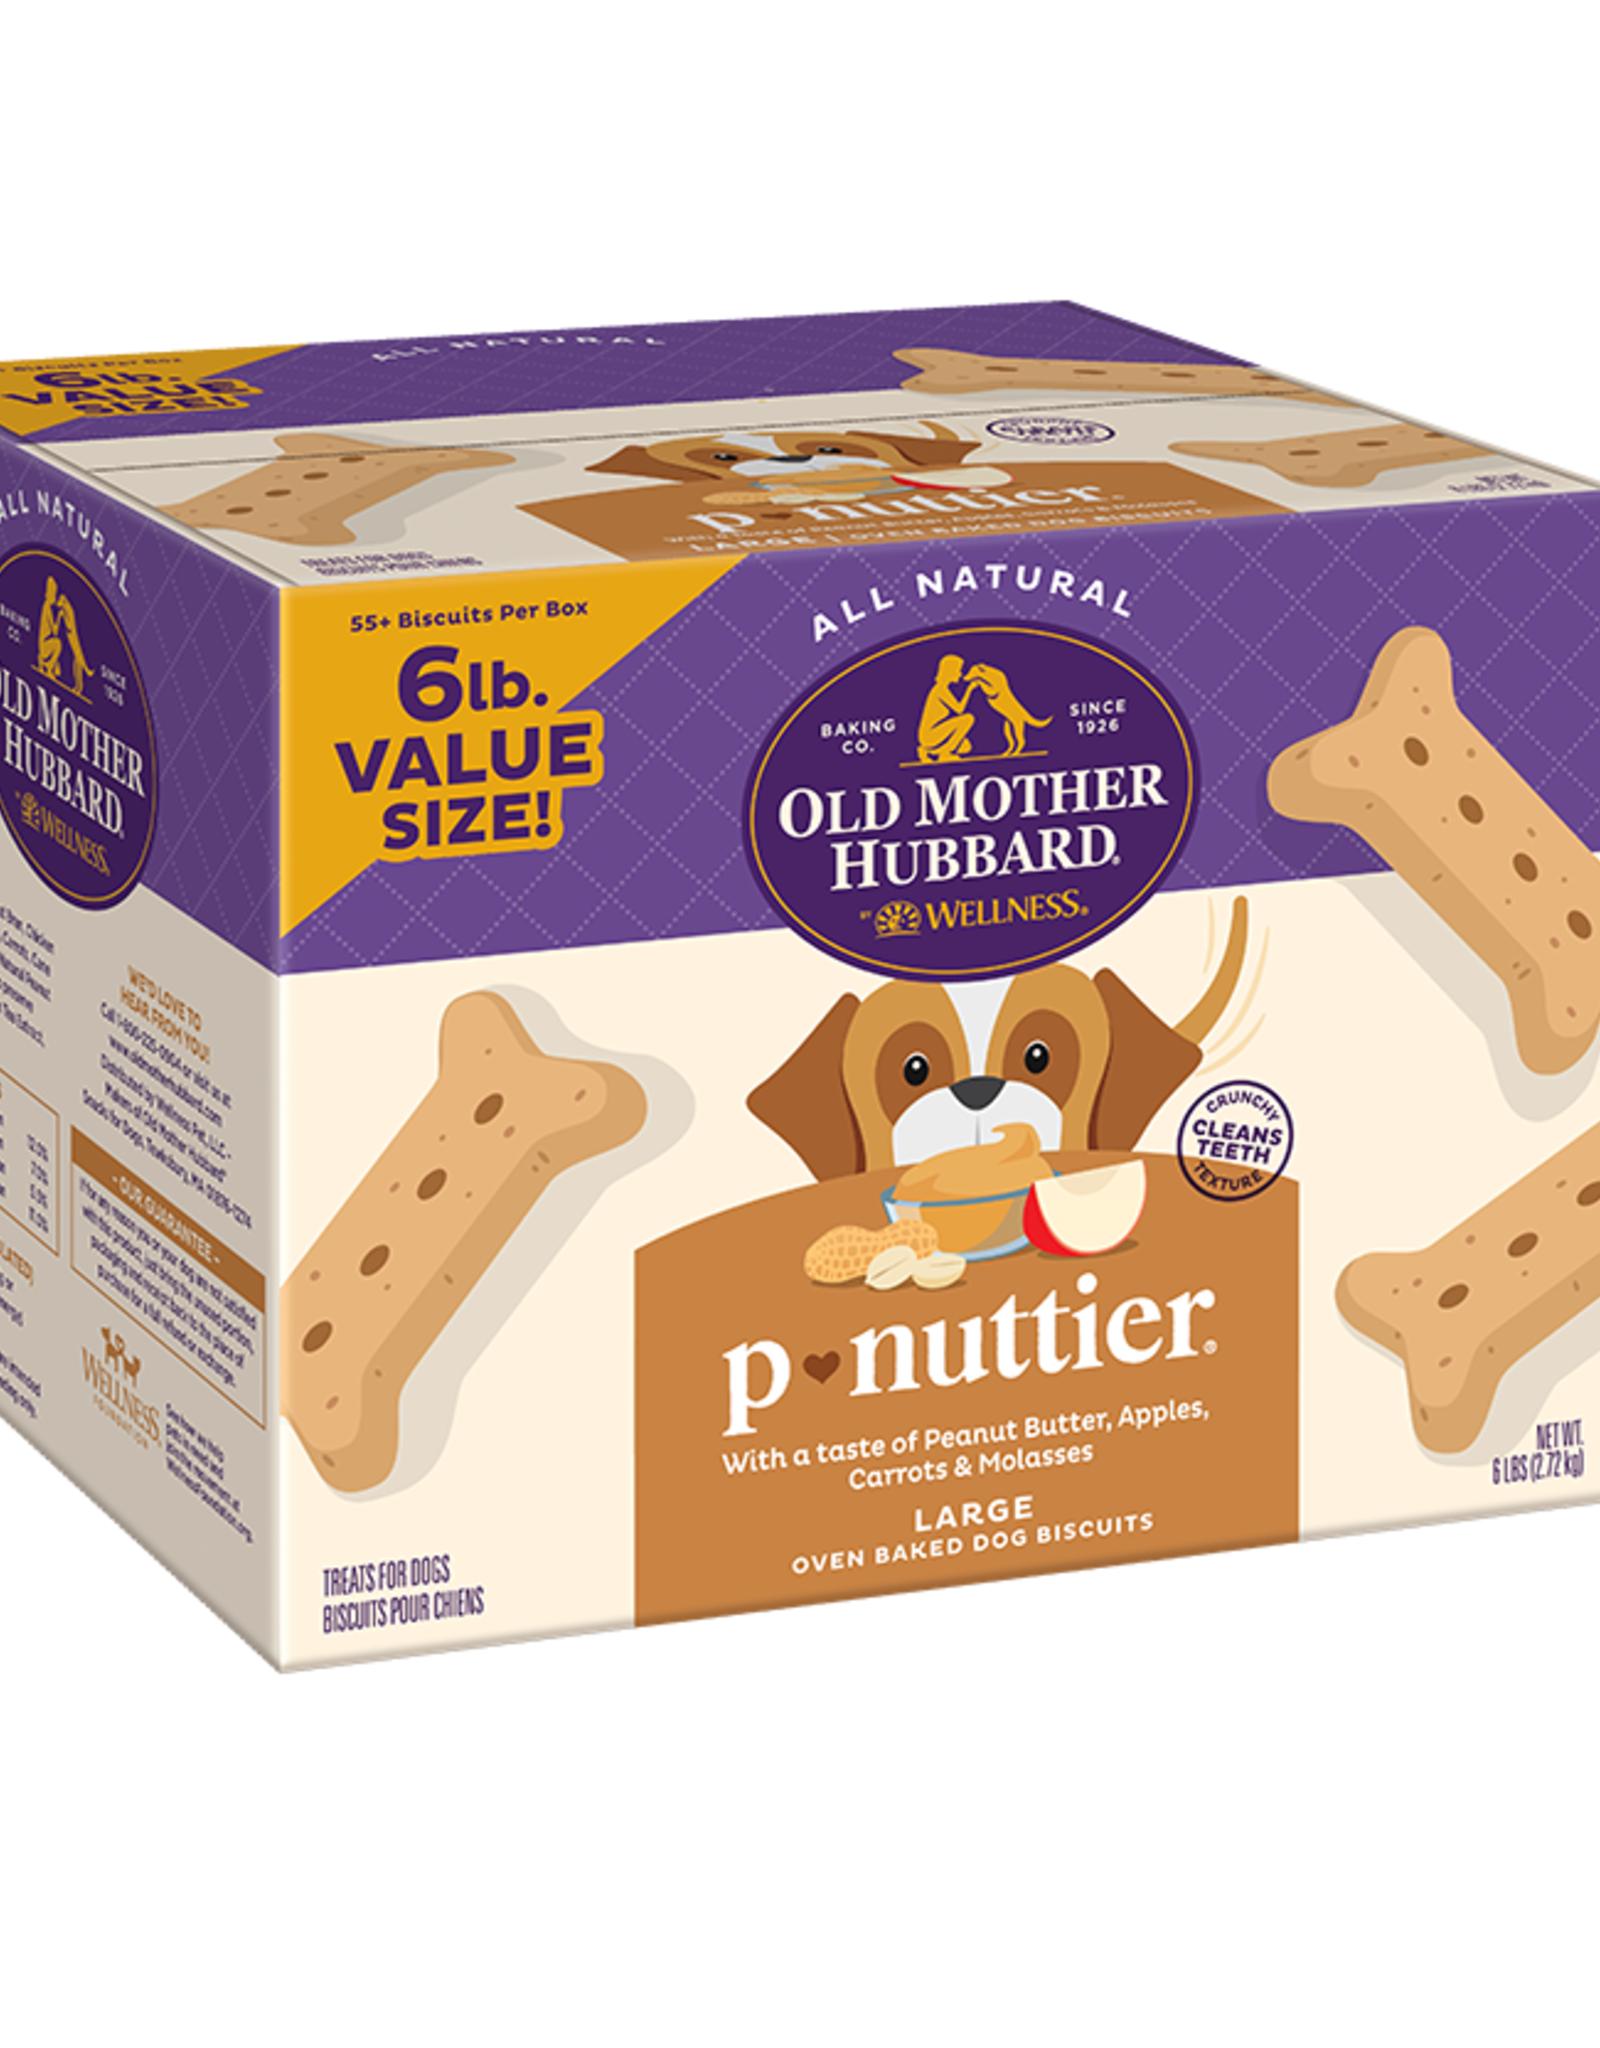 WELLPET LLC OLD MOTHER HUBBARD BISCUITS P-NUTTIER LARGE 6LB